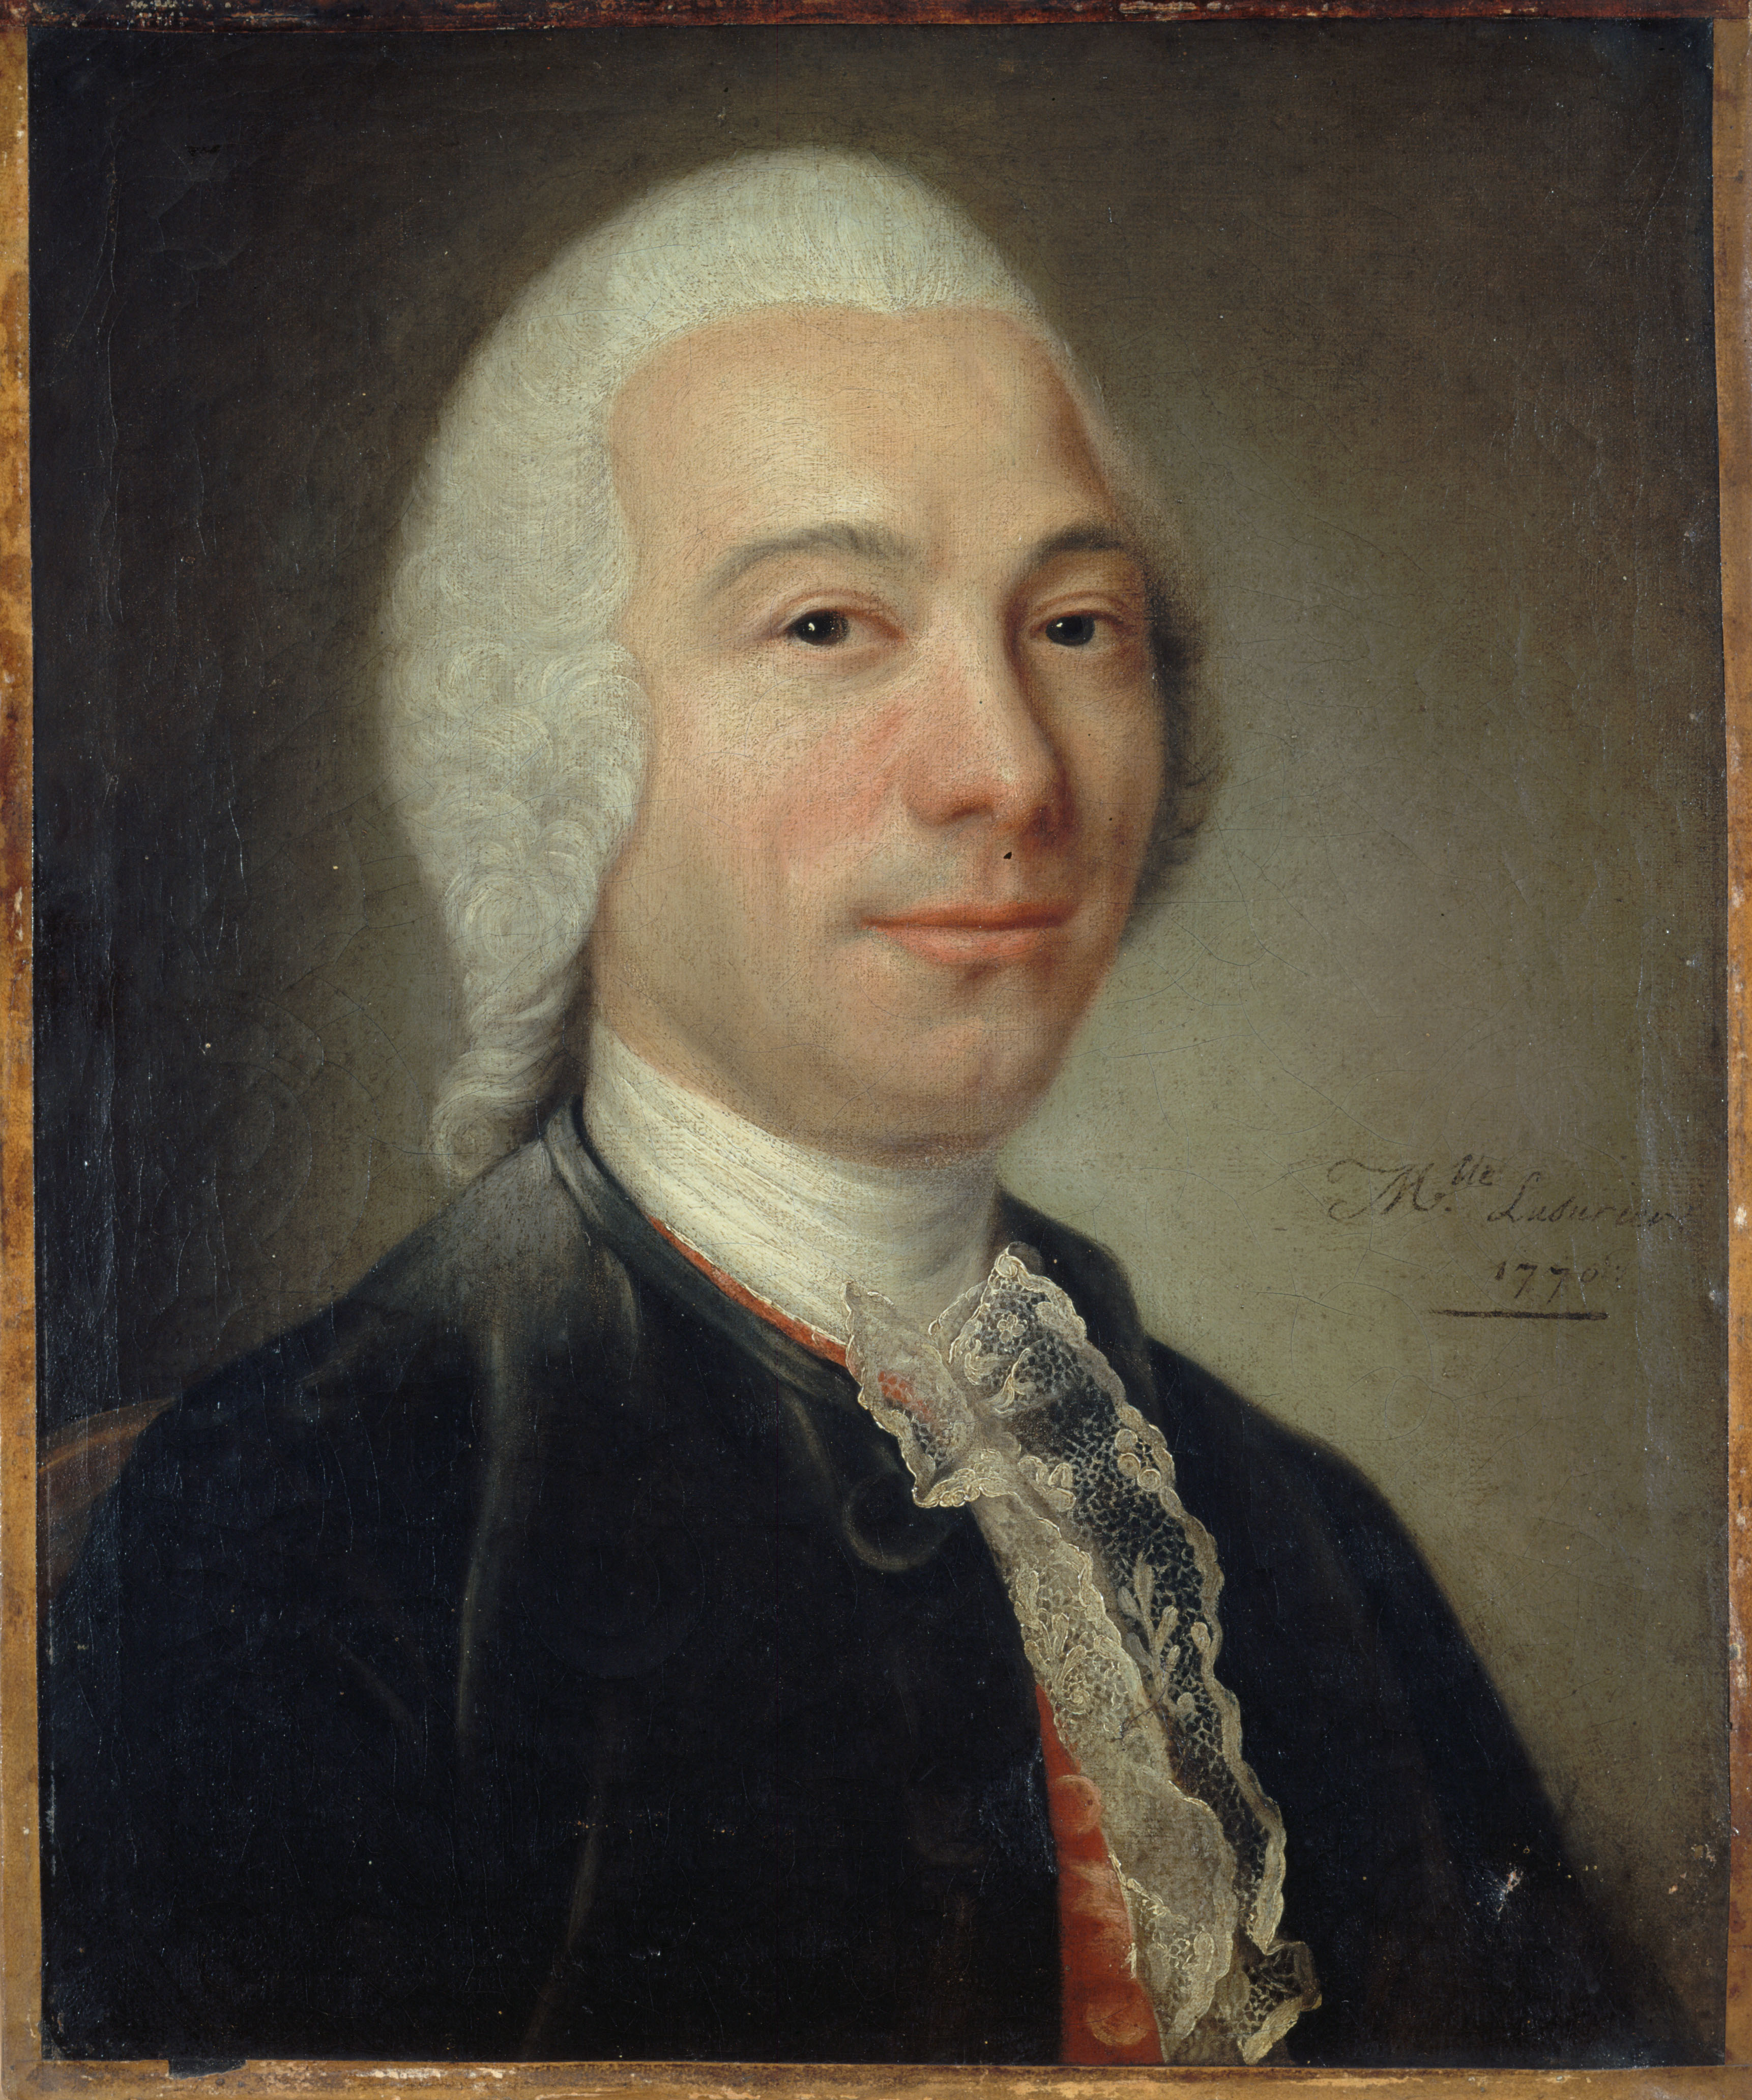 A bust-length portrait of a man wearing eighteenth-century clothing consisting of a blue overcoat, a red vest, and a white shirt with a bit of lace. He wears a white wig and looks out directly at the viewer with a slight smile. The background is neutral, with no other attributes or adornments. 